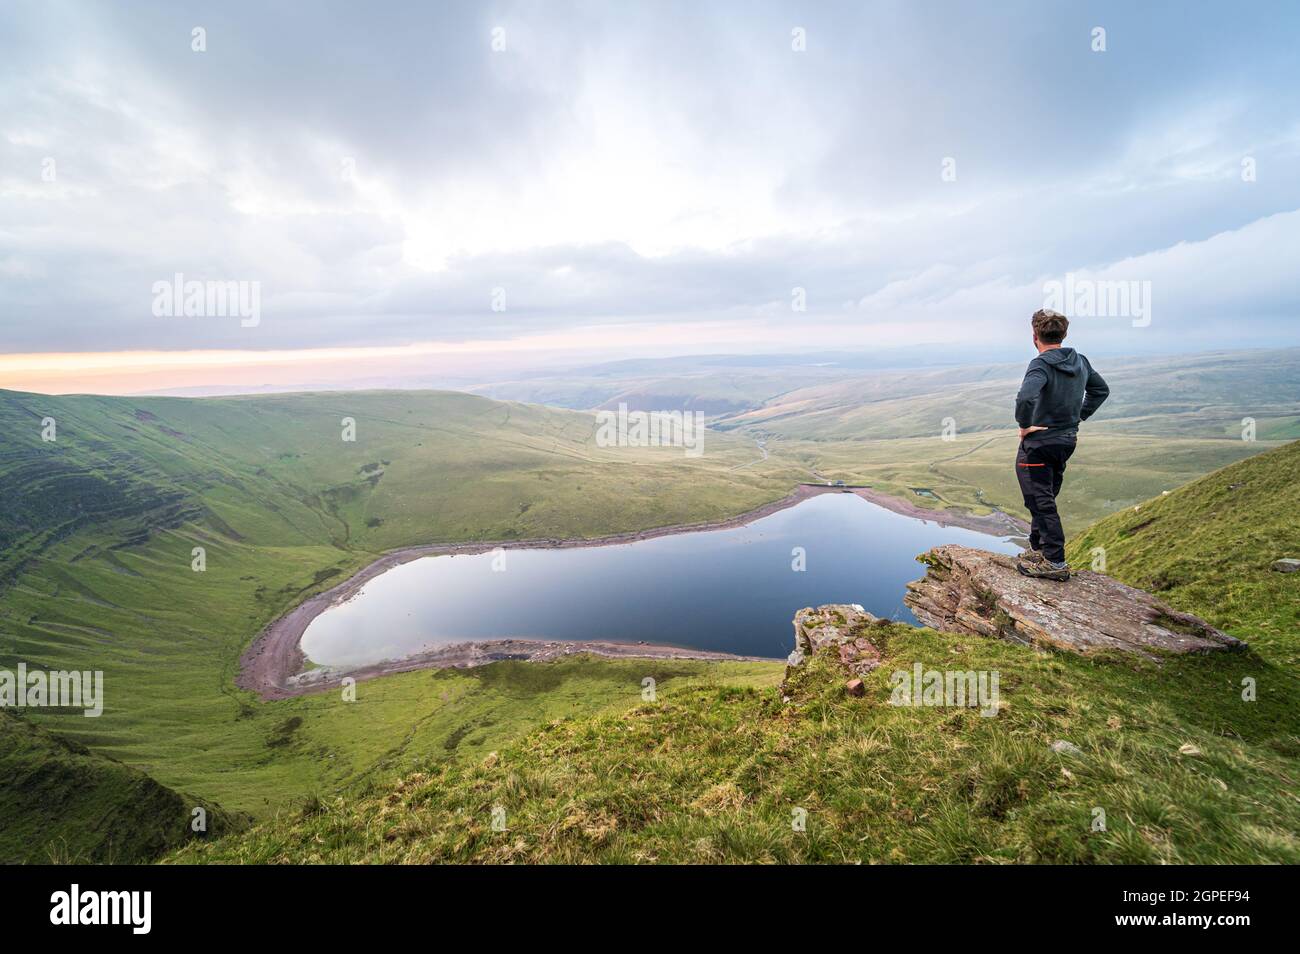 Man overlooking Llyn y Fan Fach lake. Brecon Beacons National Park. Black Mountain, Carmarthenshire, South Wales, the United Kingdom. Hiking in the UK concept. Stock Photo